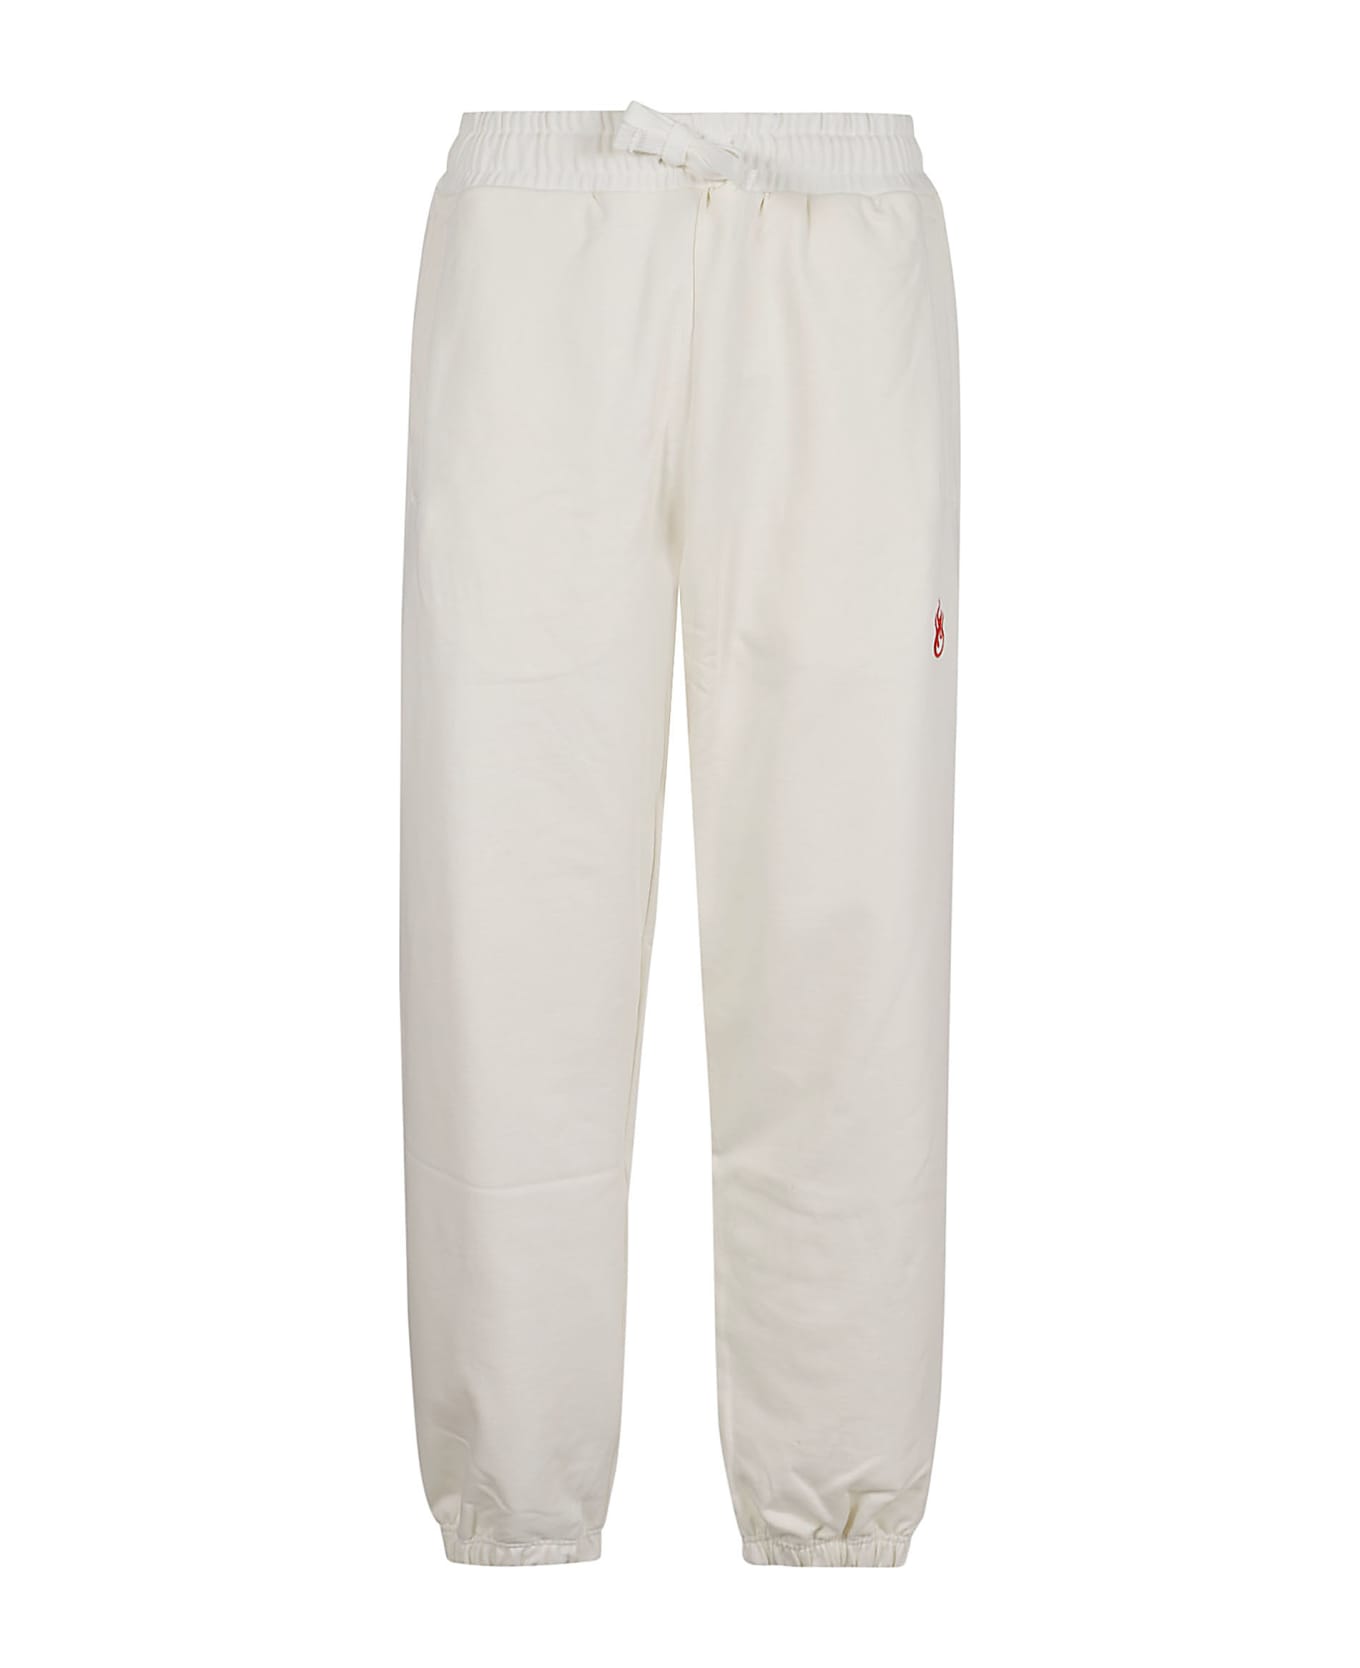 Vision of Super White Pants With Flames Logo And Metal Label - White スウェットパンツ